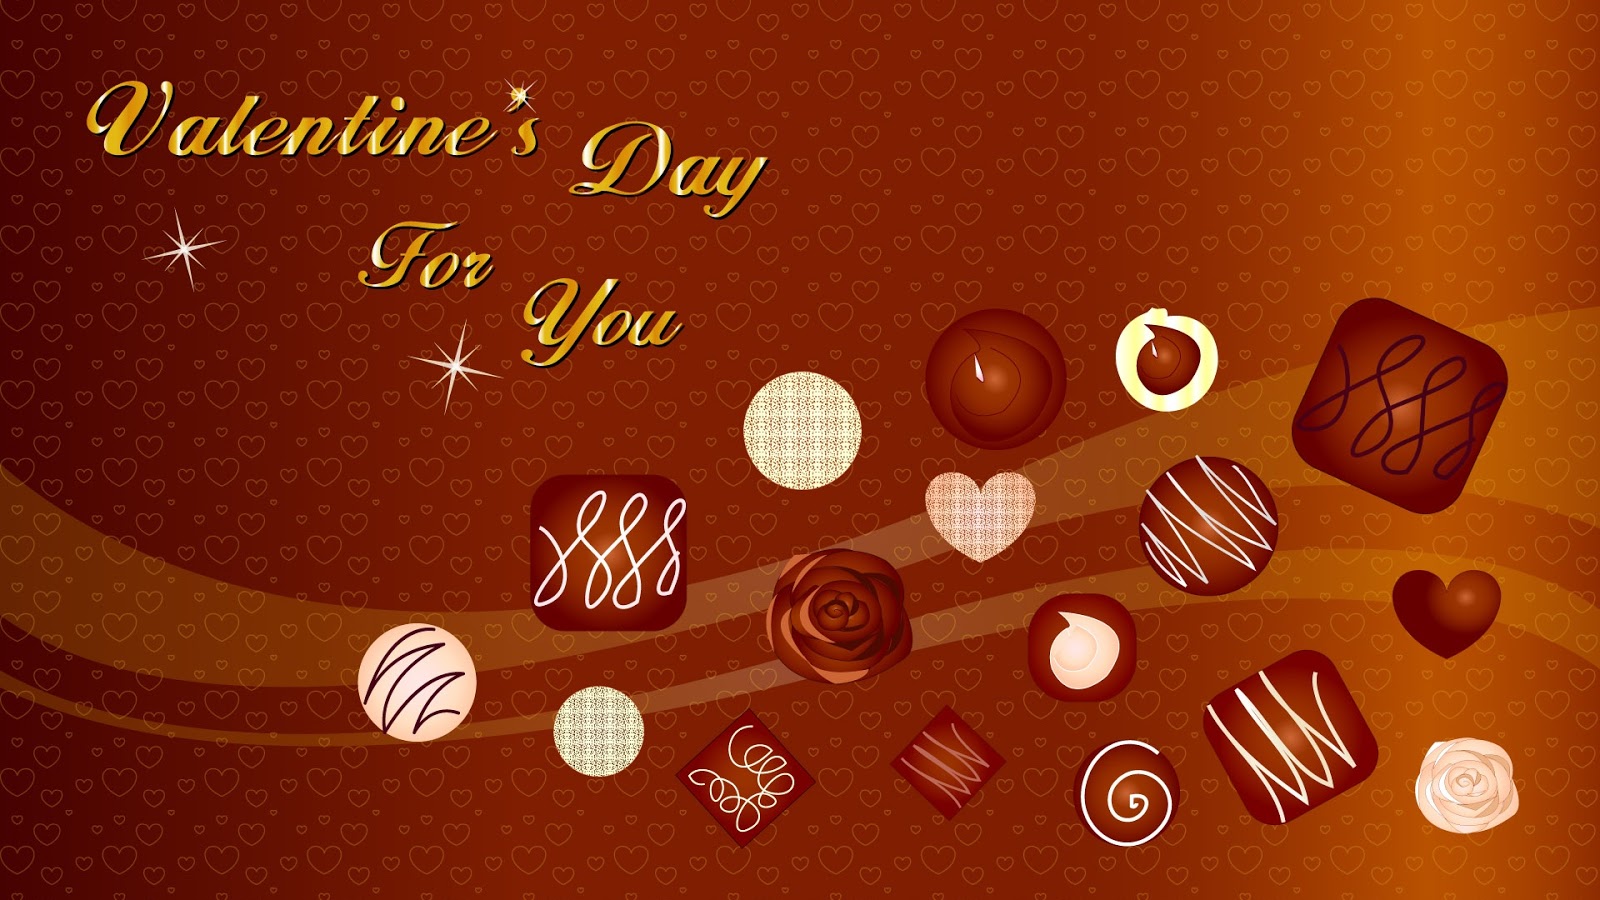 Free Valentines Wallpaper For Computer